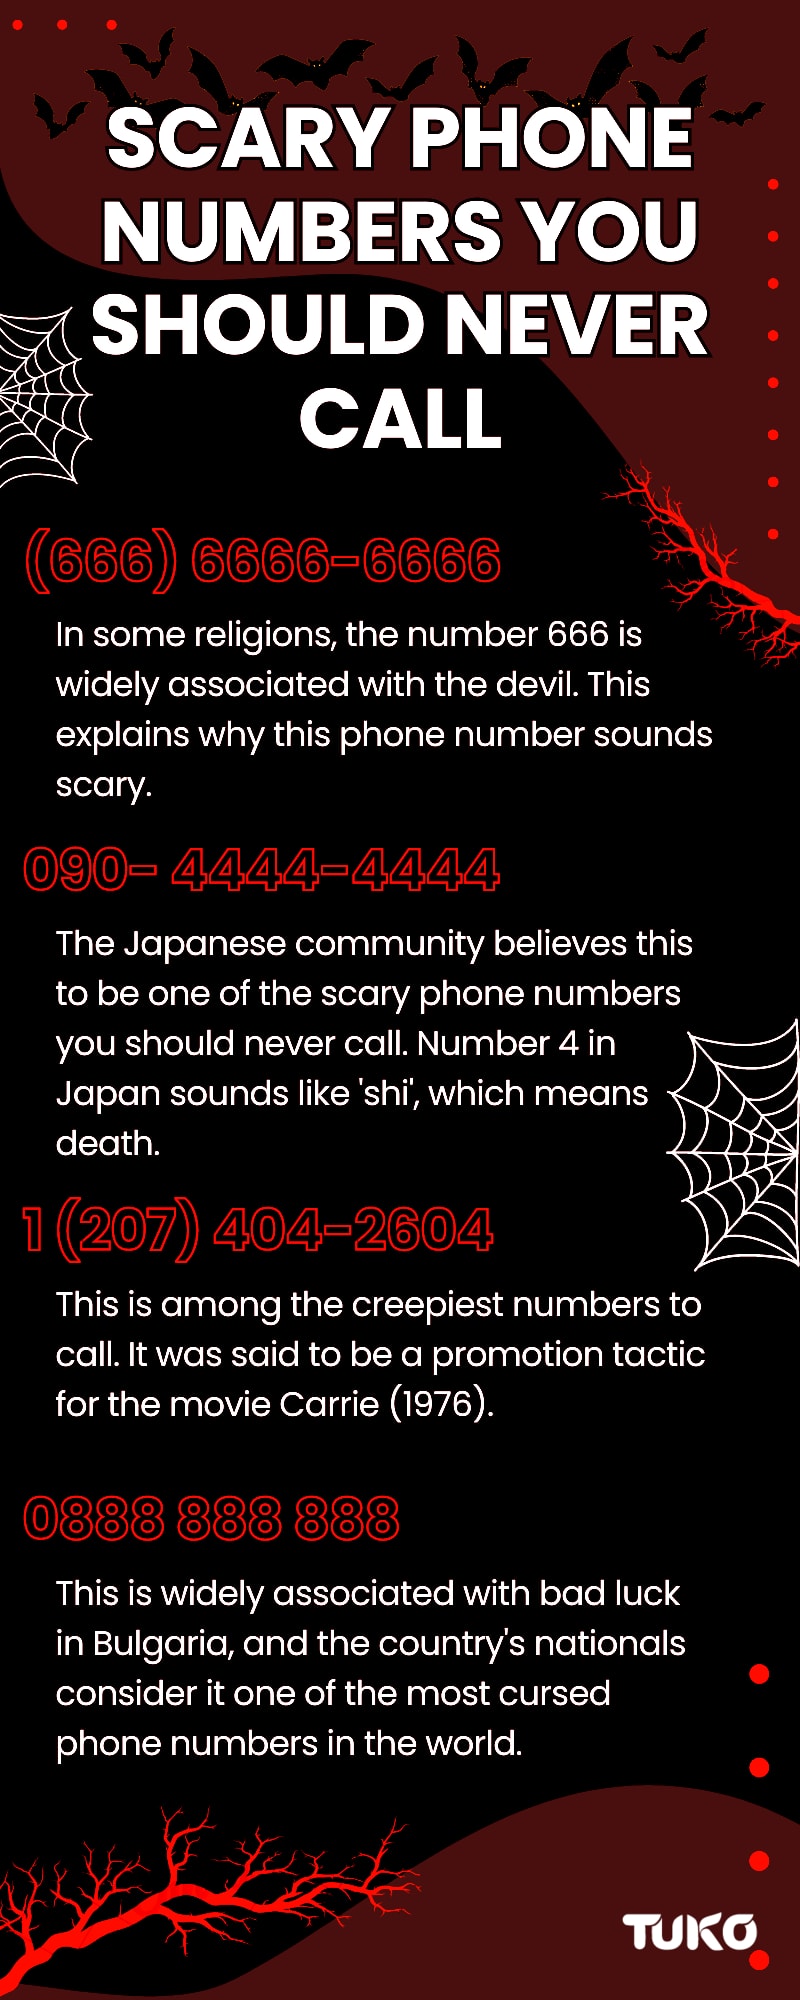 Scary phone numbers you should never call